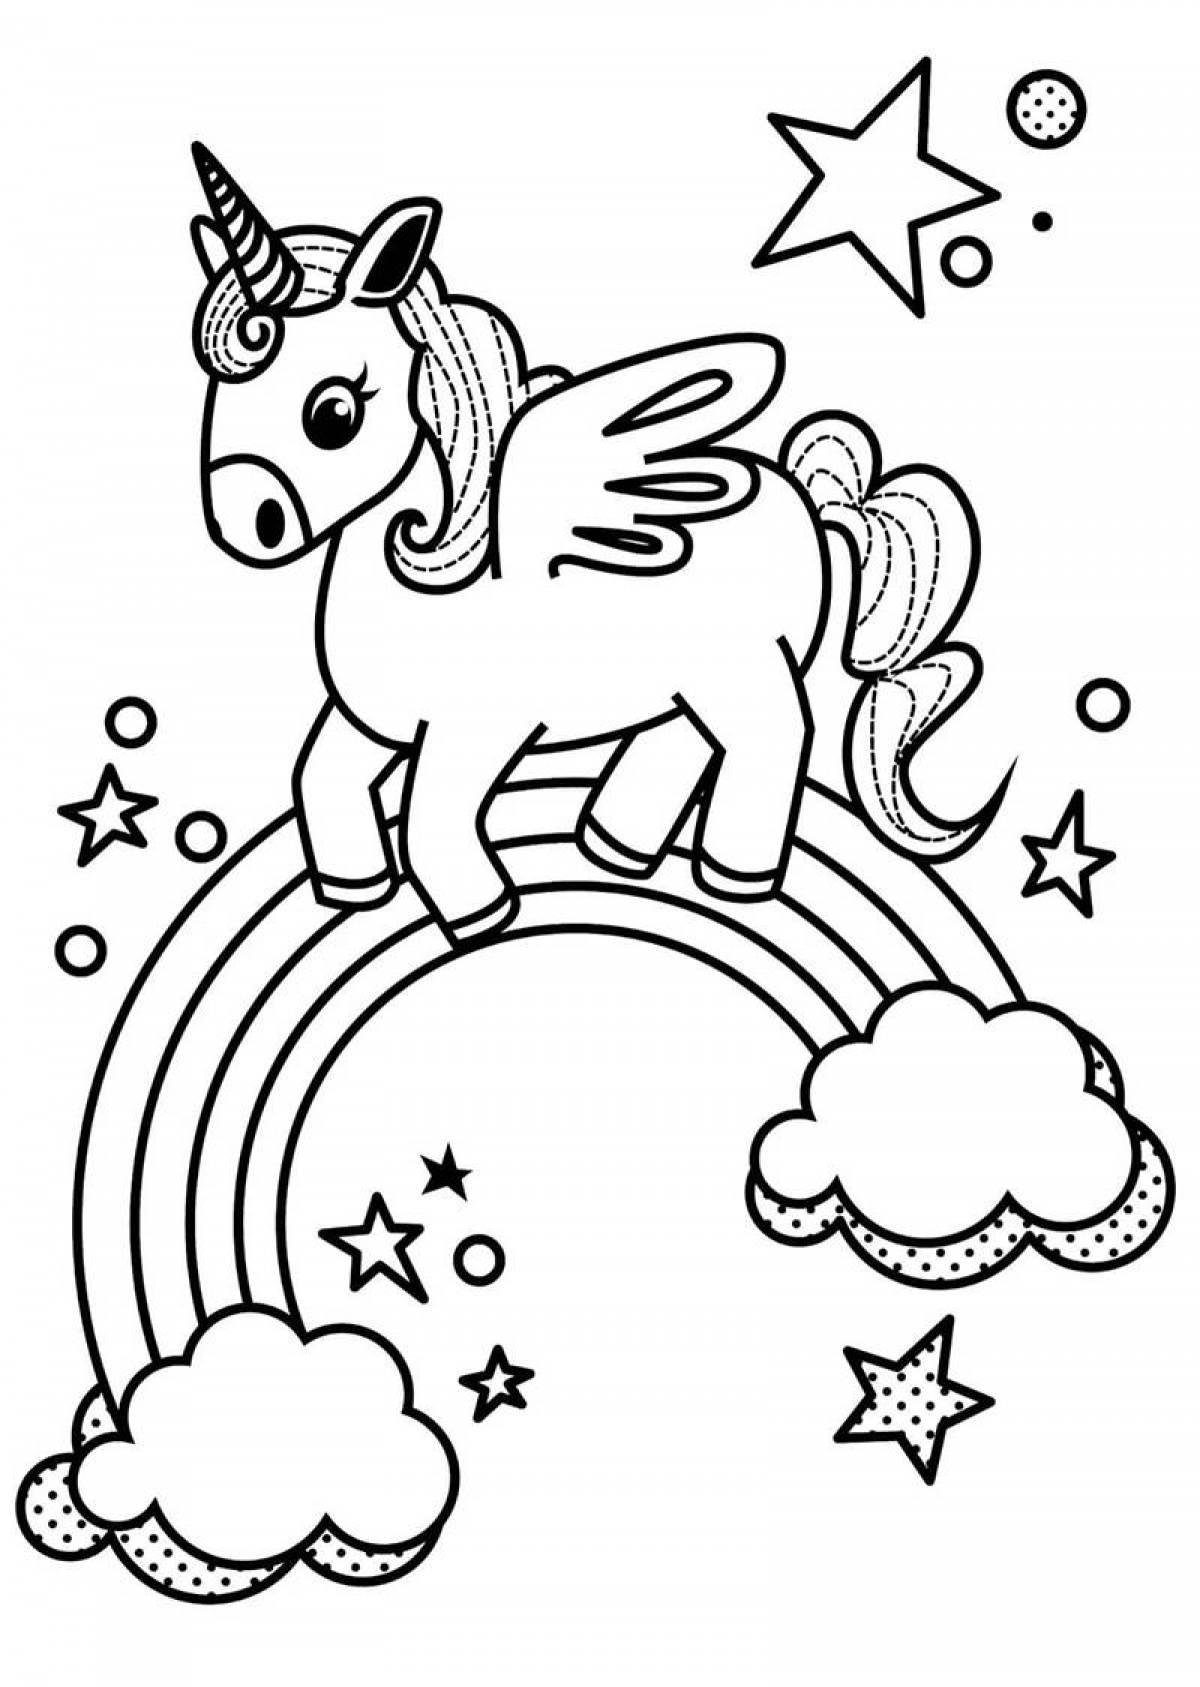 Fancy unicorn coloring book for kids